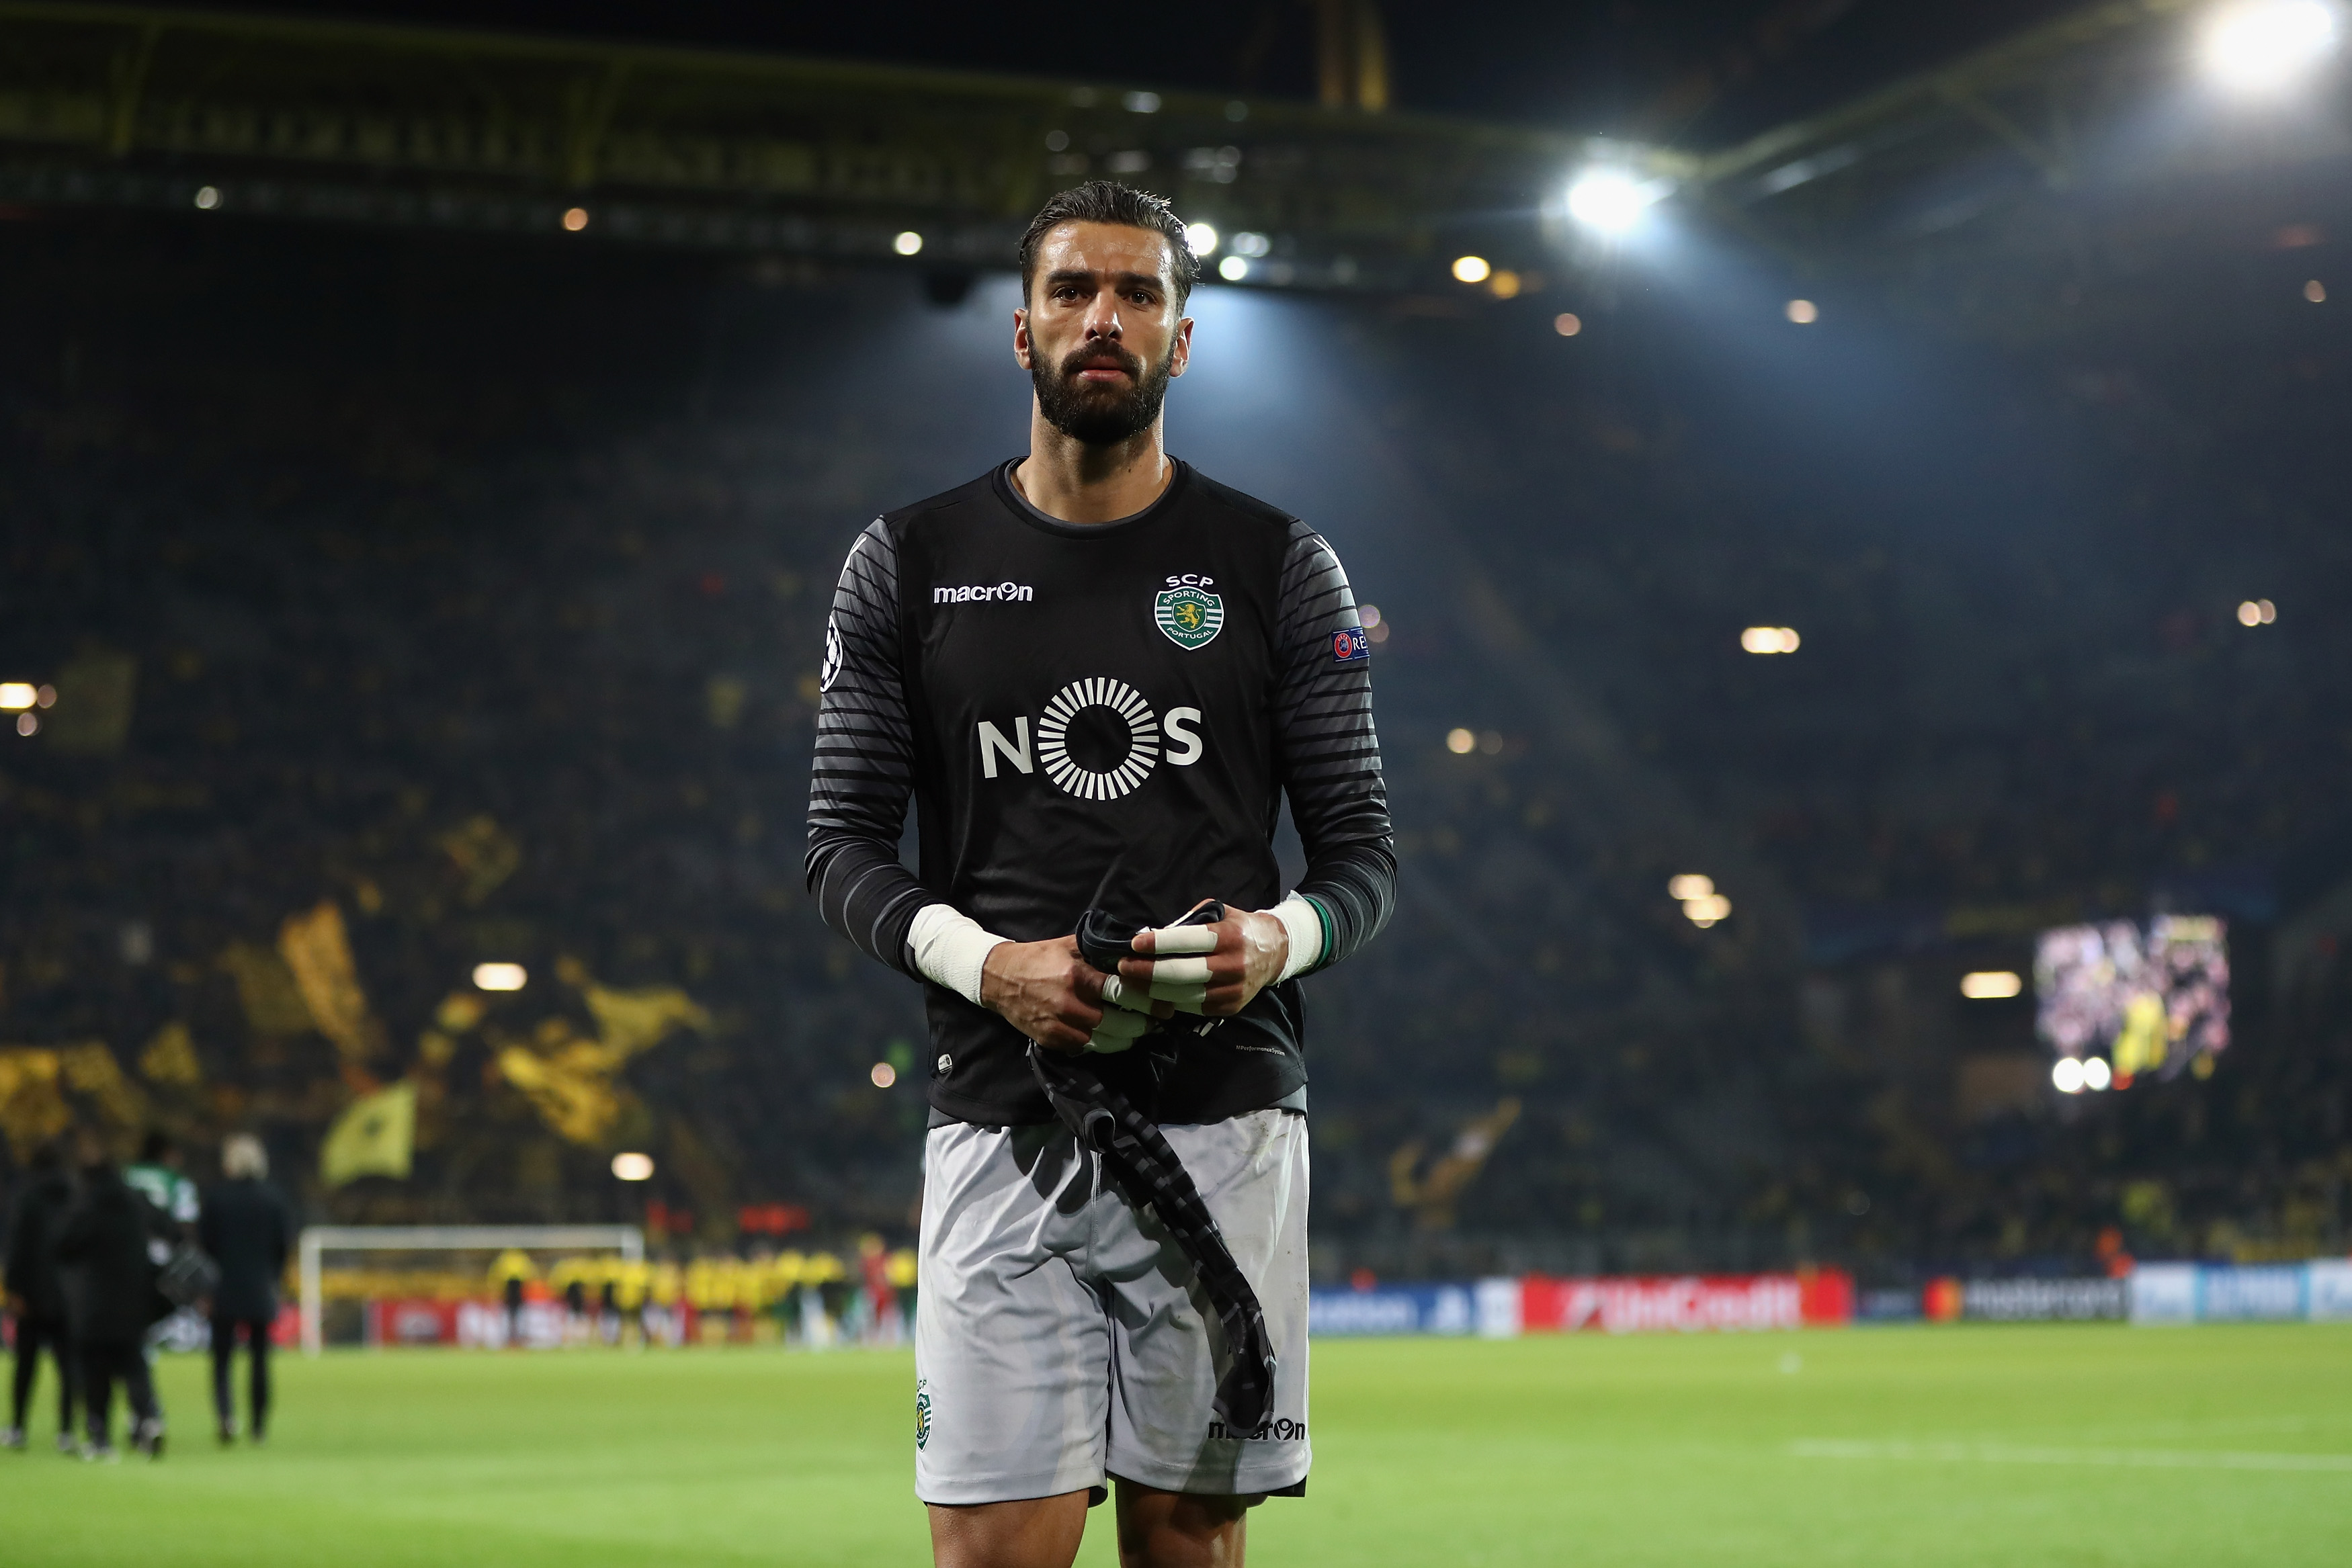 DORTMUND, GERMANY - NOVEMBER 02:  Goalkeeper Rui Patricio of Sporting reacts after the UEFA Champions League Group F match between Borussia Dortmund and Sporting Clube de Portugal at Signal Iduna Park on November 2, 2016 in Dortmund, Germany.  (Photo by Alex Grimm/Bongarts/Getty Images)